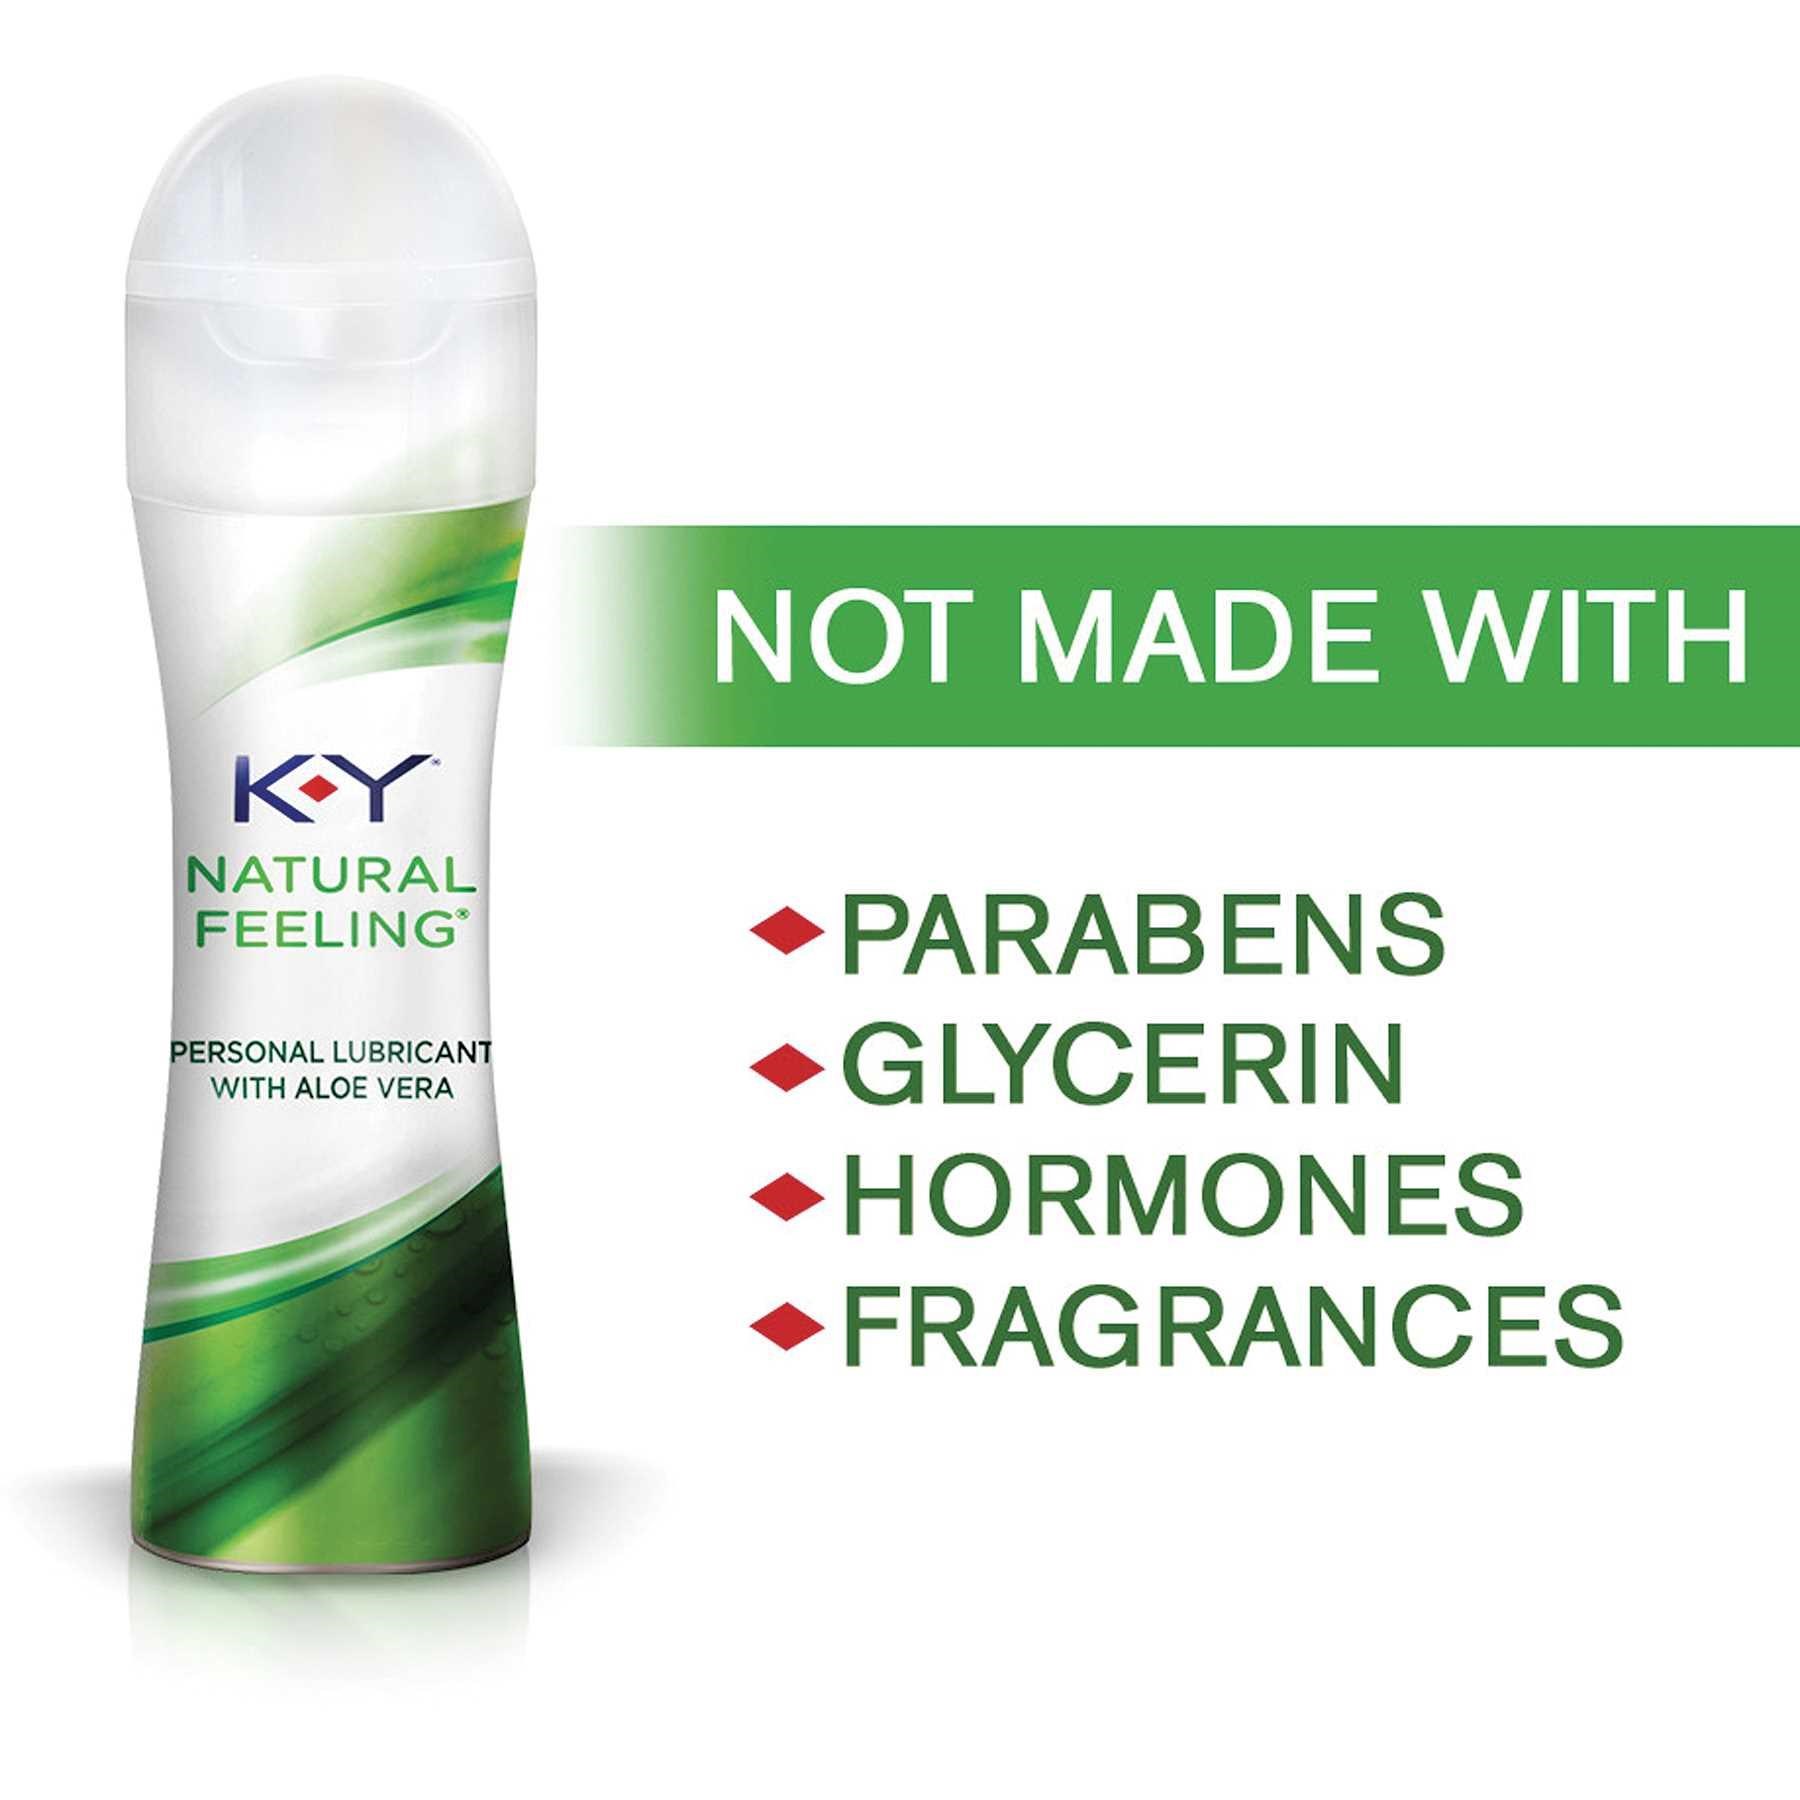 K-Y Natural Feeling With Aloe Vera Lubricant info